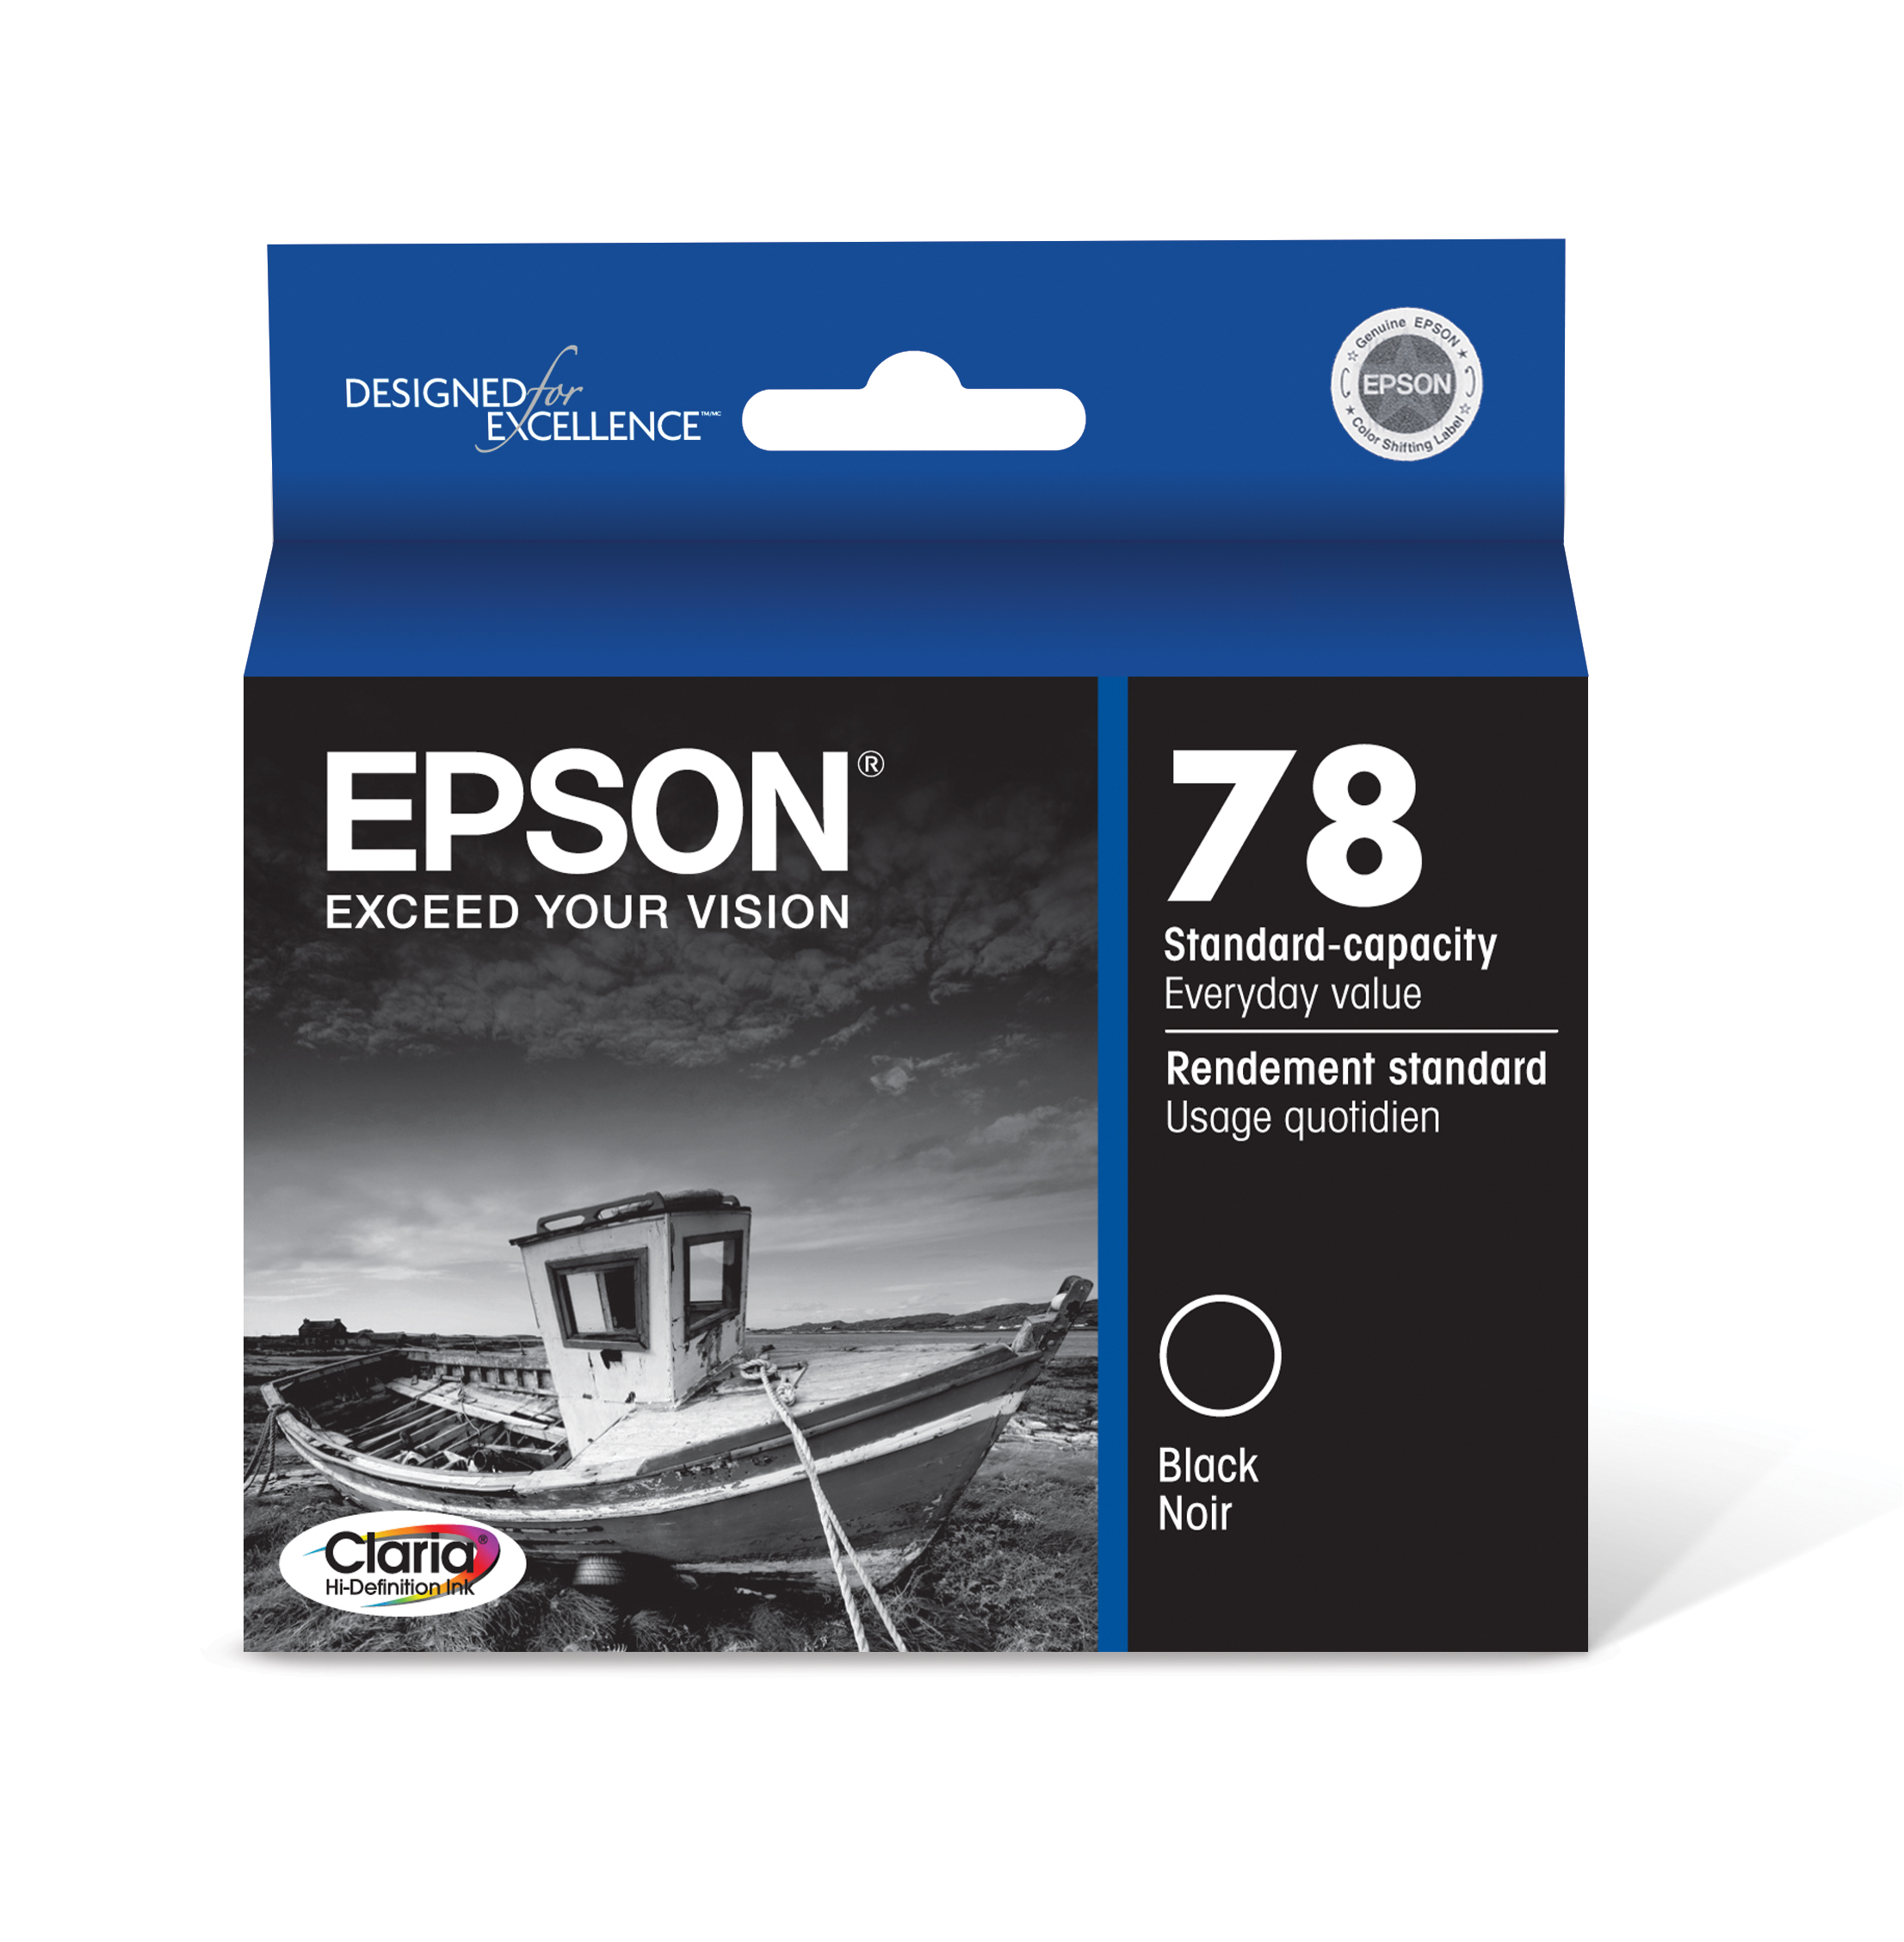 EPSON 78 Claria Hi-Definition Ink Standard Capacity Black Cartridge (T078120-S) Works with Artisan 50, Photo R260, R280, R380, RX580, RX595, RX680 - image 1 of 5